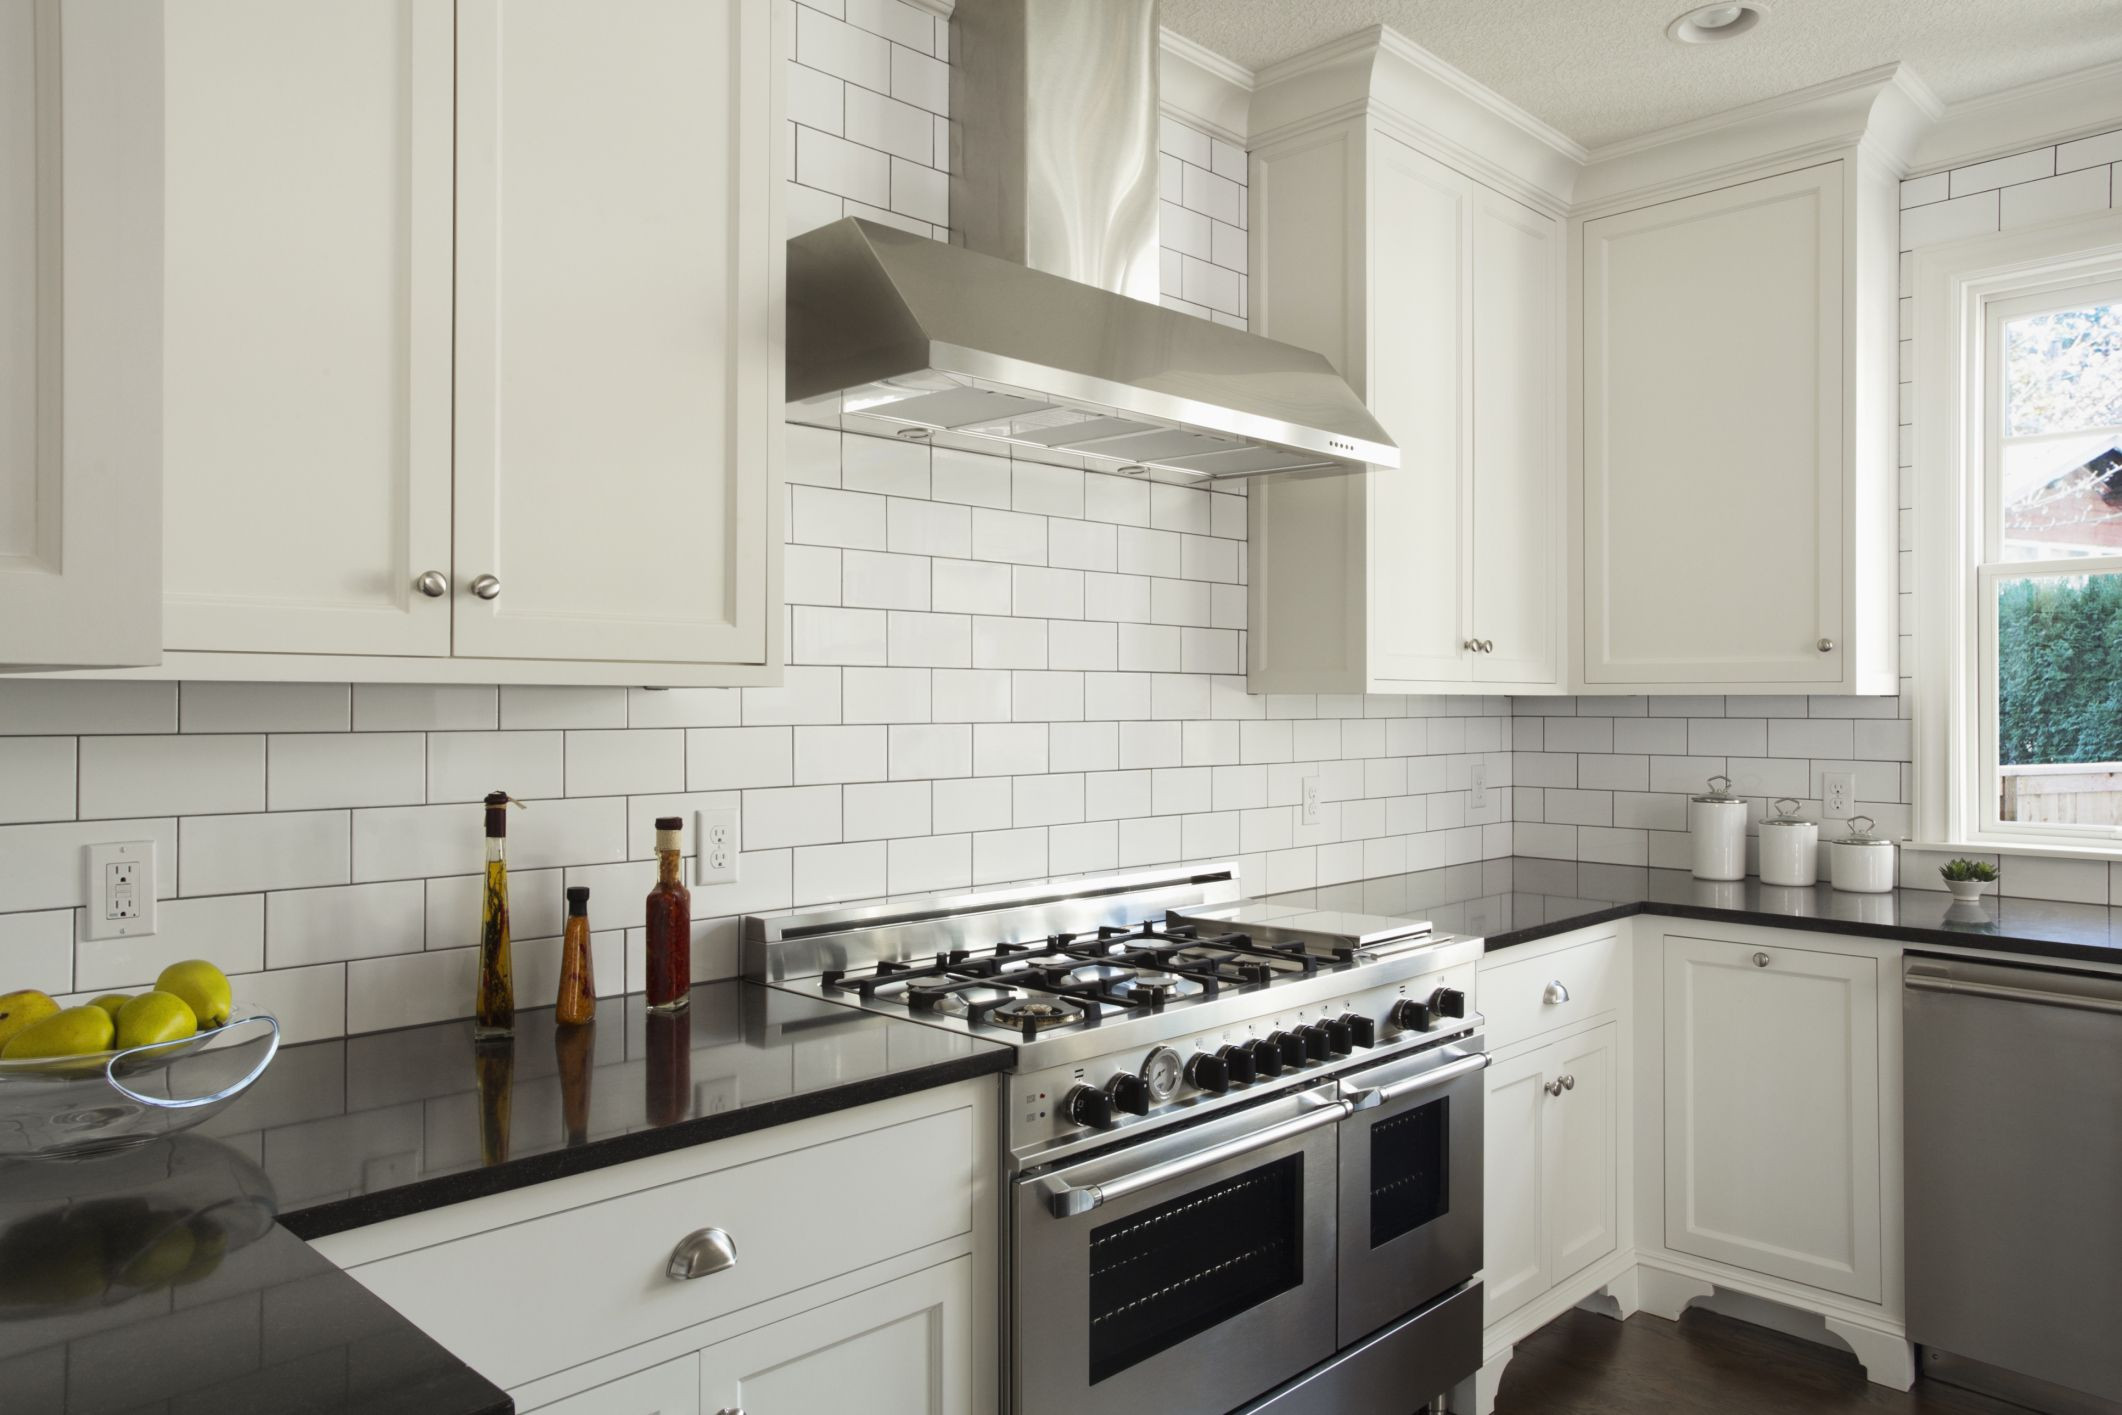 Kitchen With White Subway Tile
 How Subway Tile Can Effectively Work in Modern Rooms